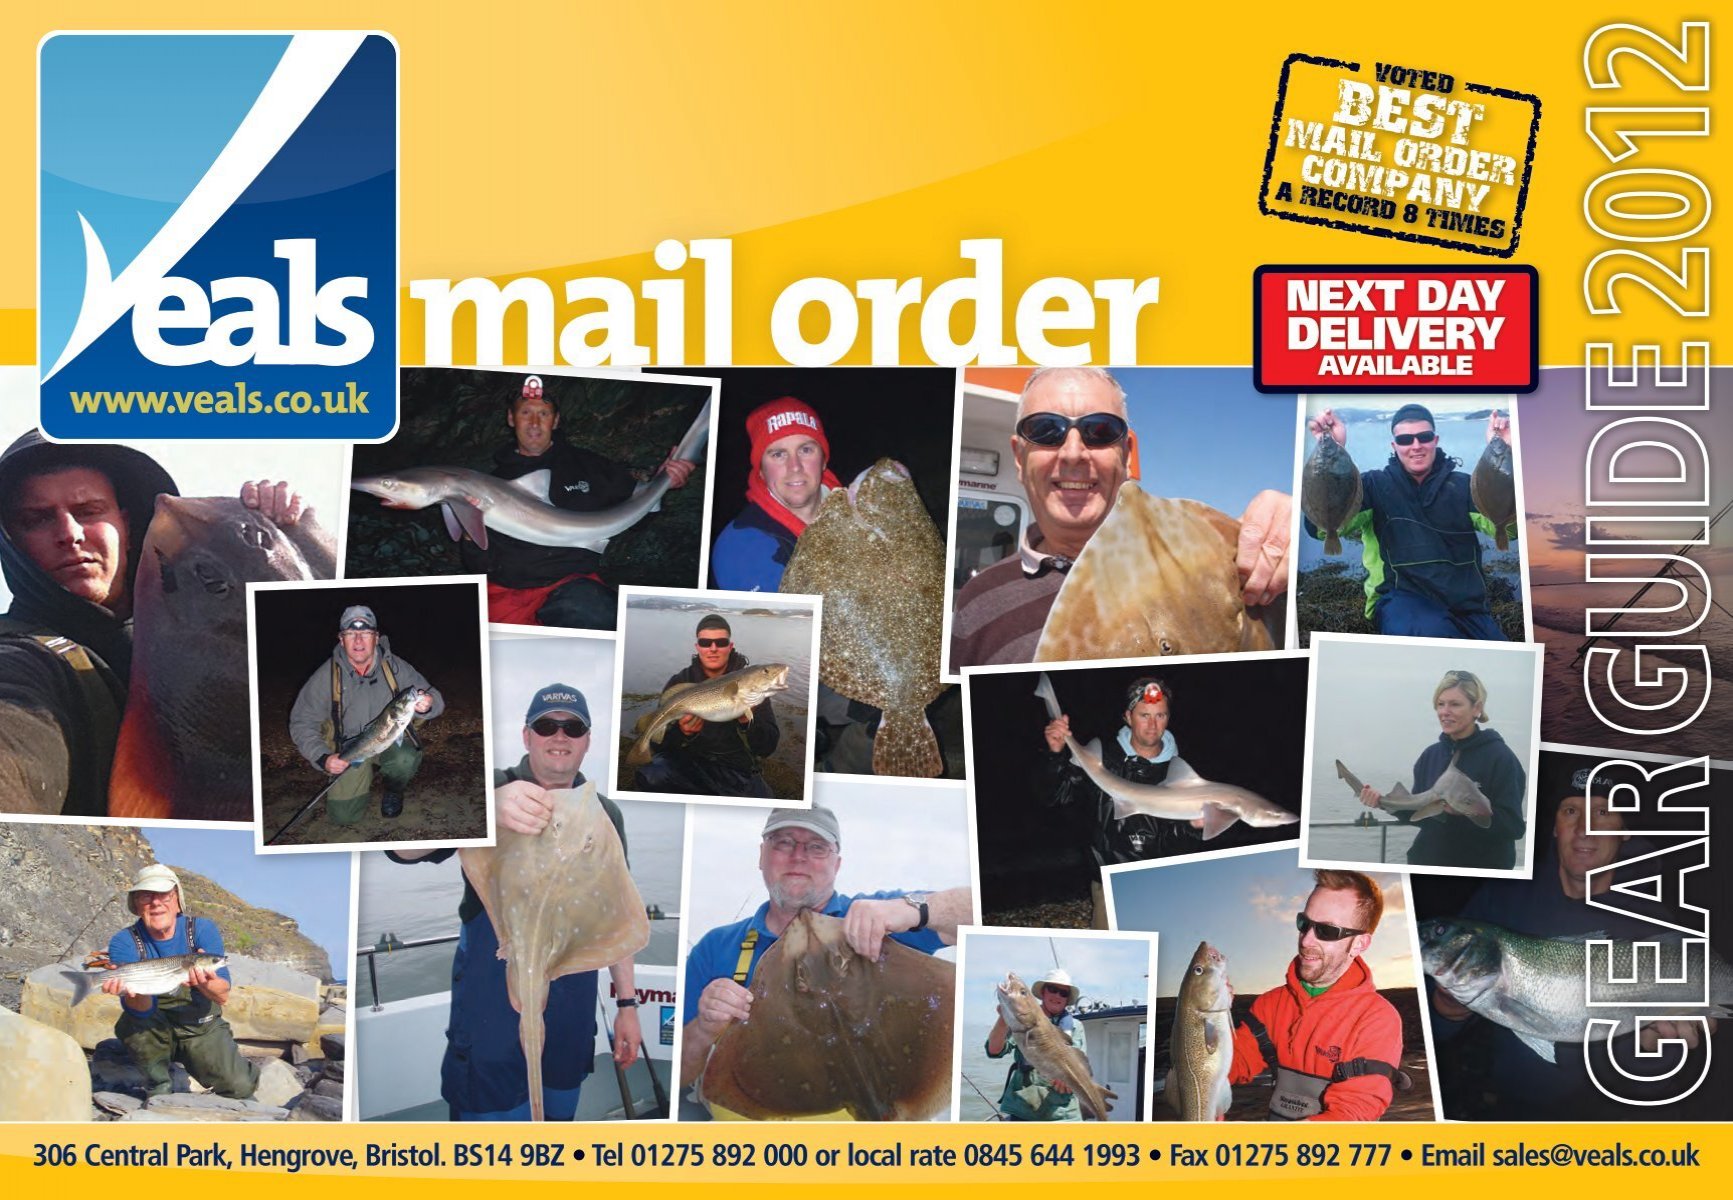 download full catalogue - Veals Mail Order